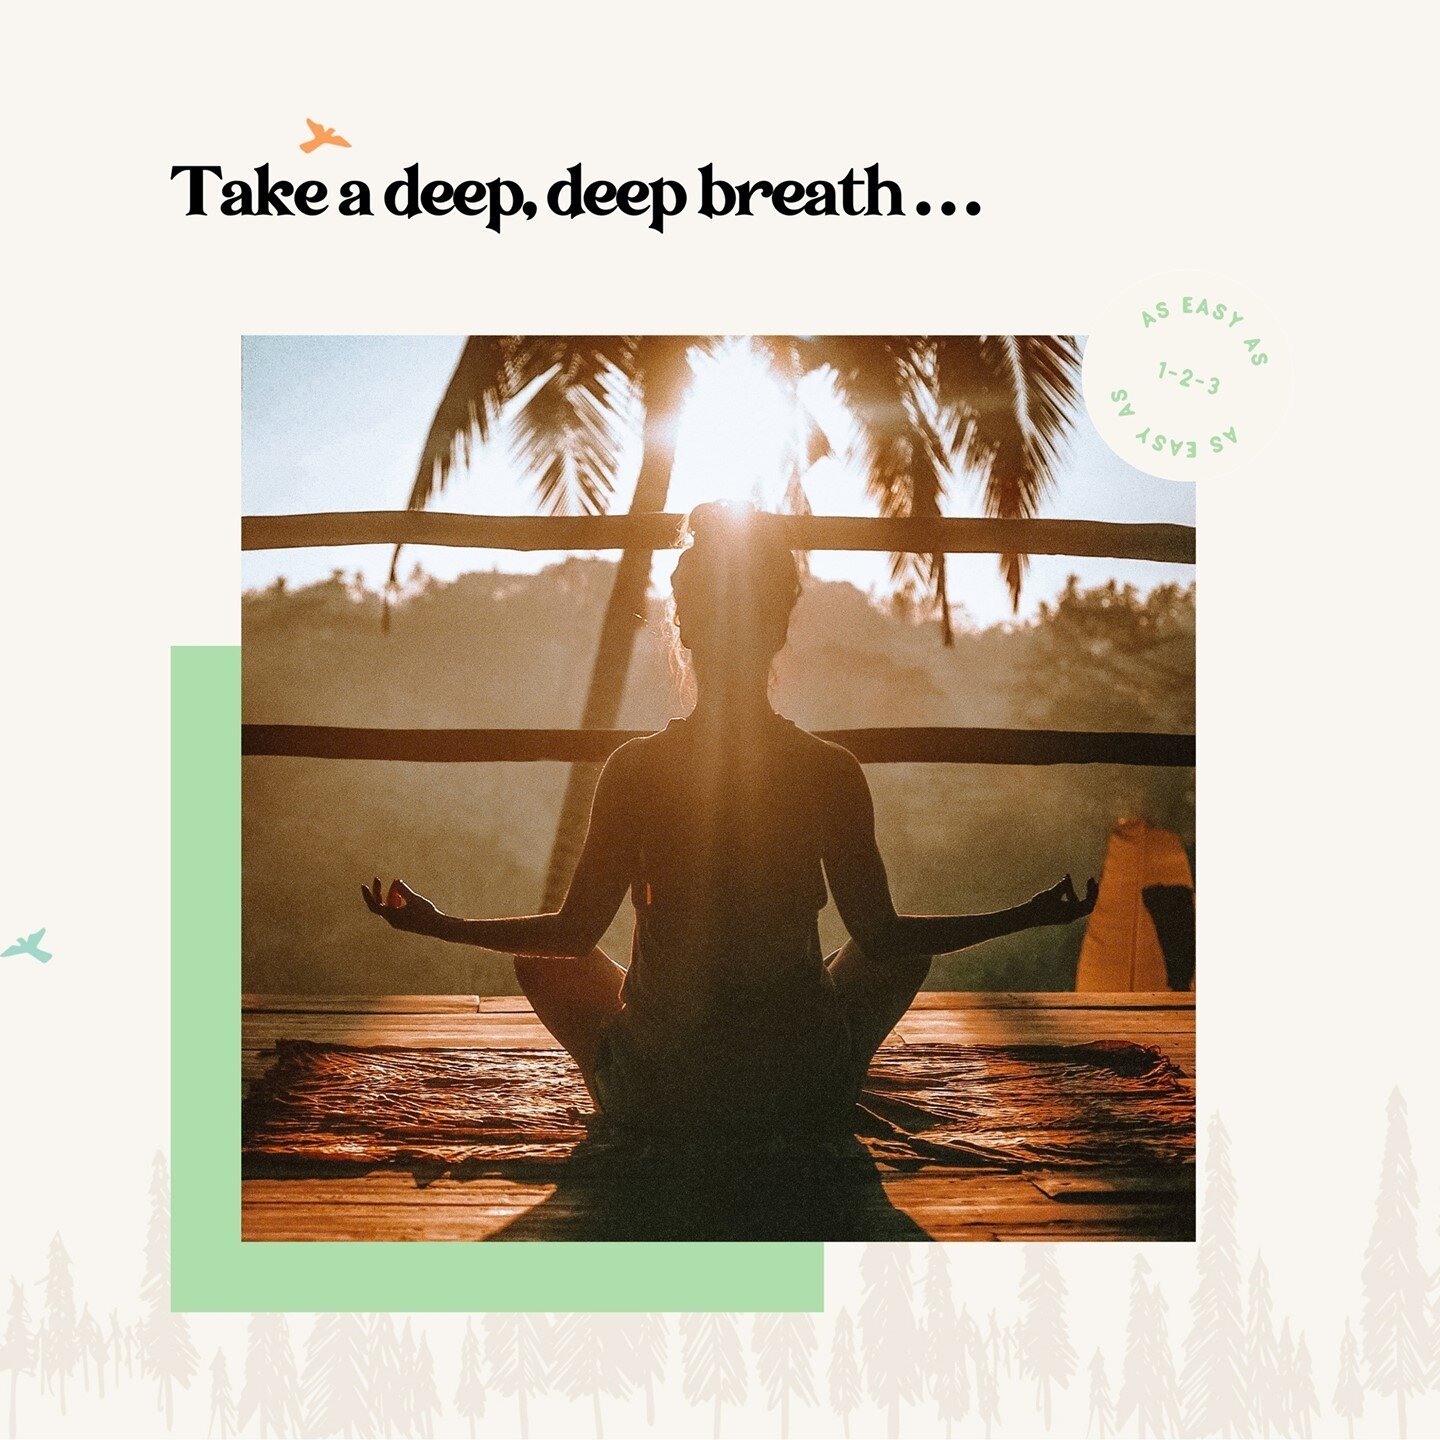 🎶 &ldquo;Mama said there&rsquo;ll be days like this&hellip;&rdquo;⁠
⁠
🙌 Consider this a virtual hug &ndash; a cyber whisper saying &ldquo;you got this!&rdquo;⁠
⁠
🧘🏻 Take a deep, deep breath. There&rsquo;s a light at the end of the tunnel!